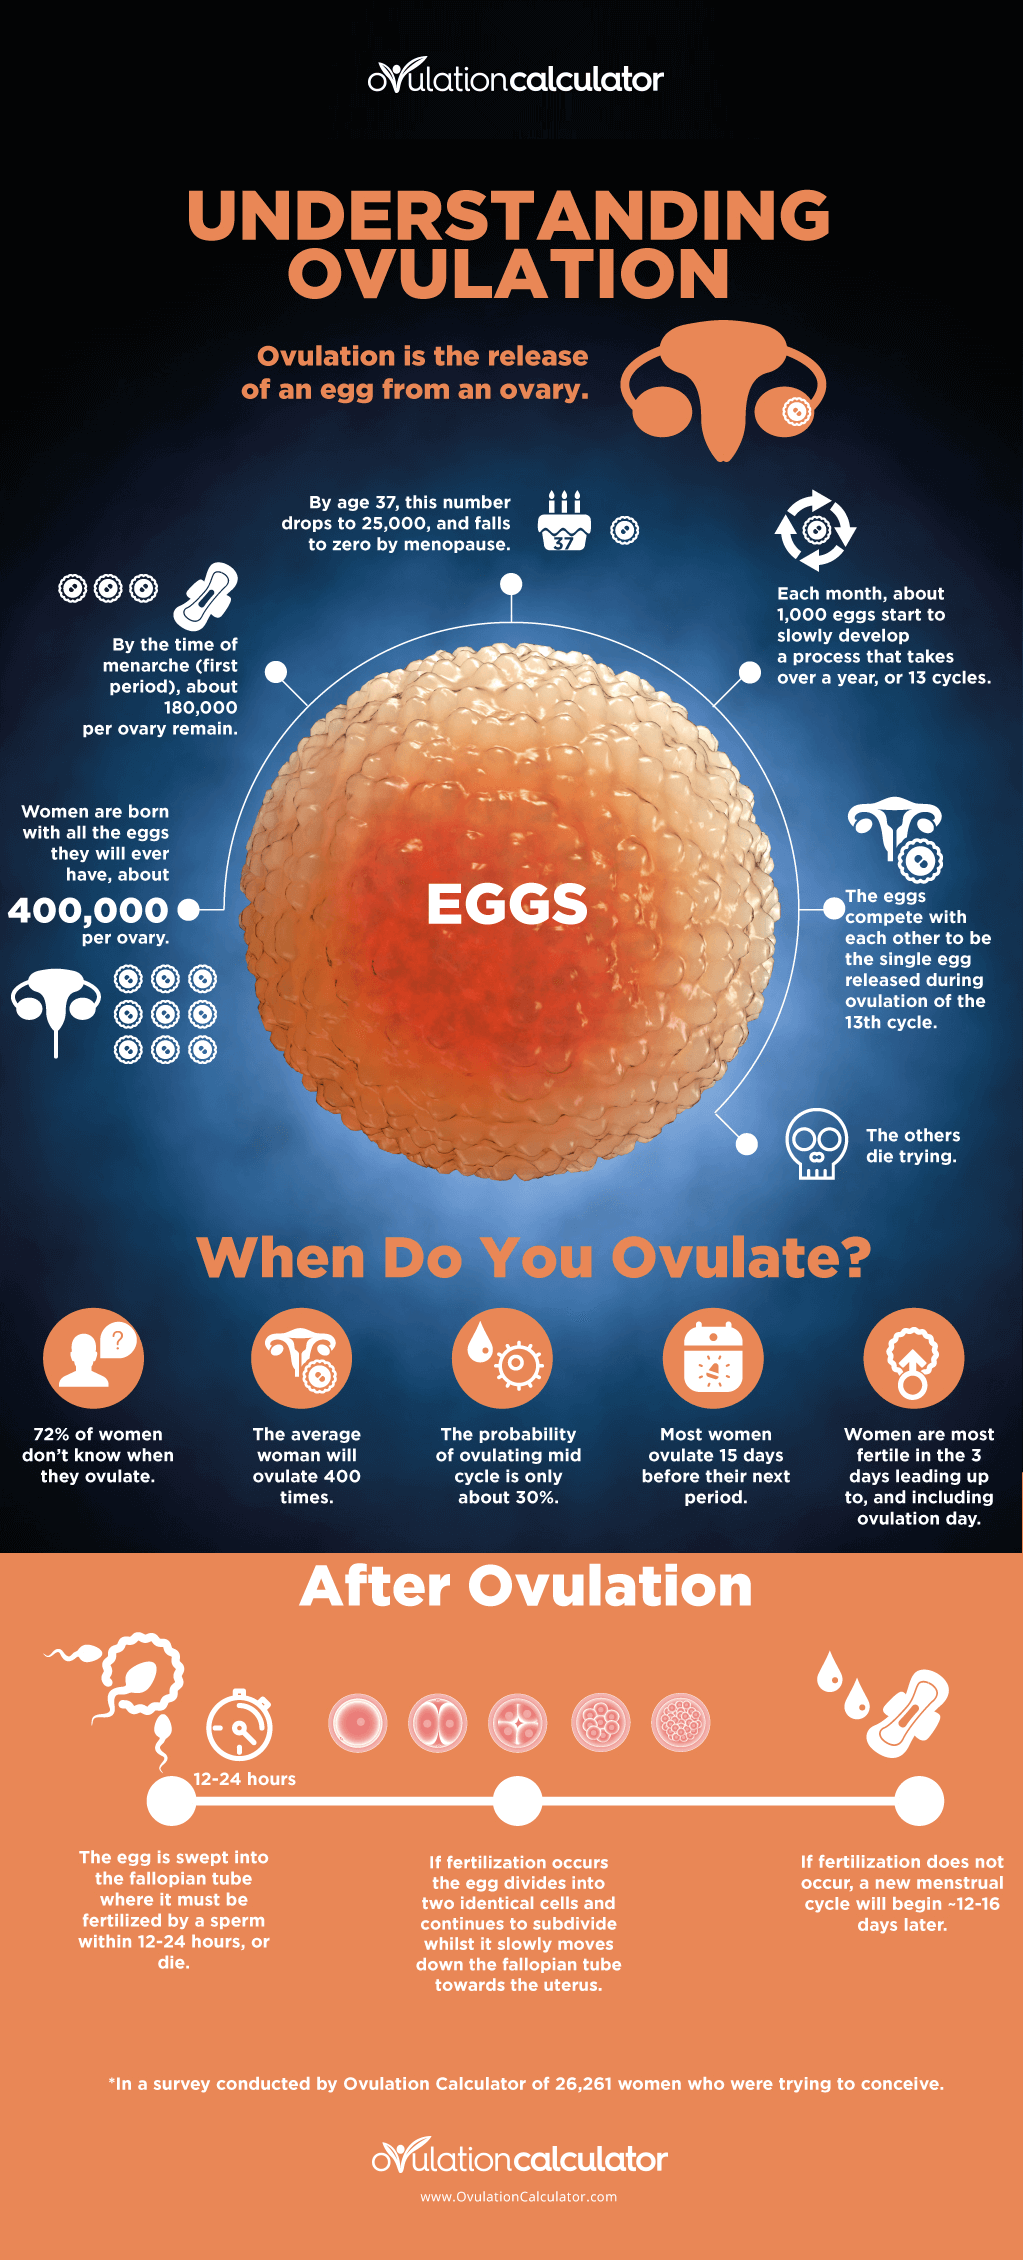 Can You Ovulate More Than Once A Month Or Cycle?